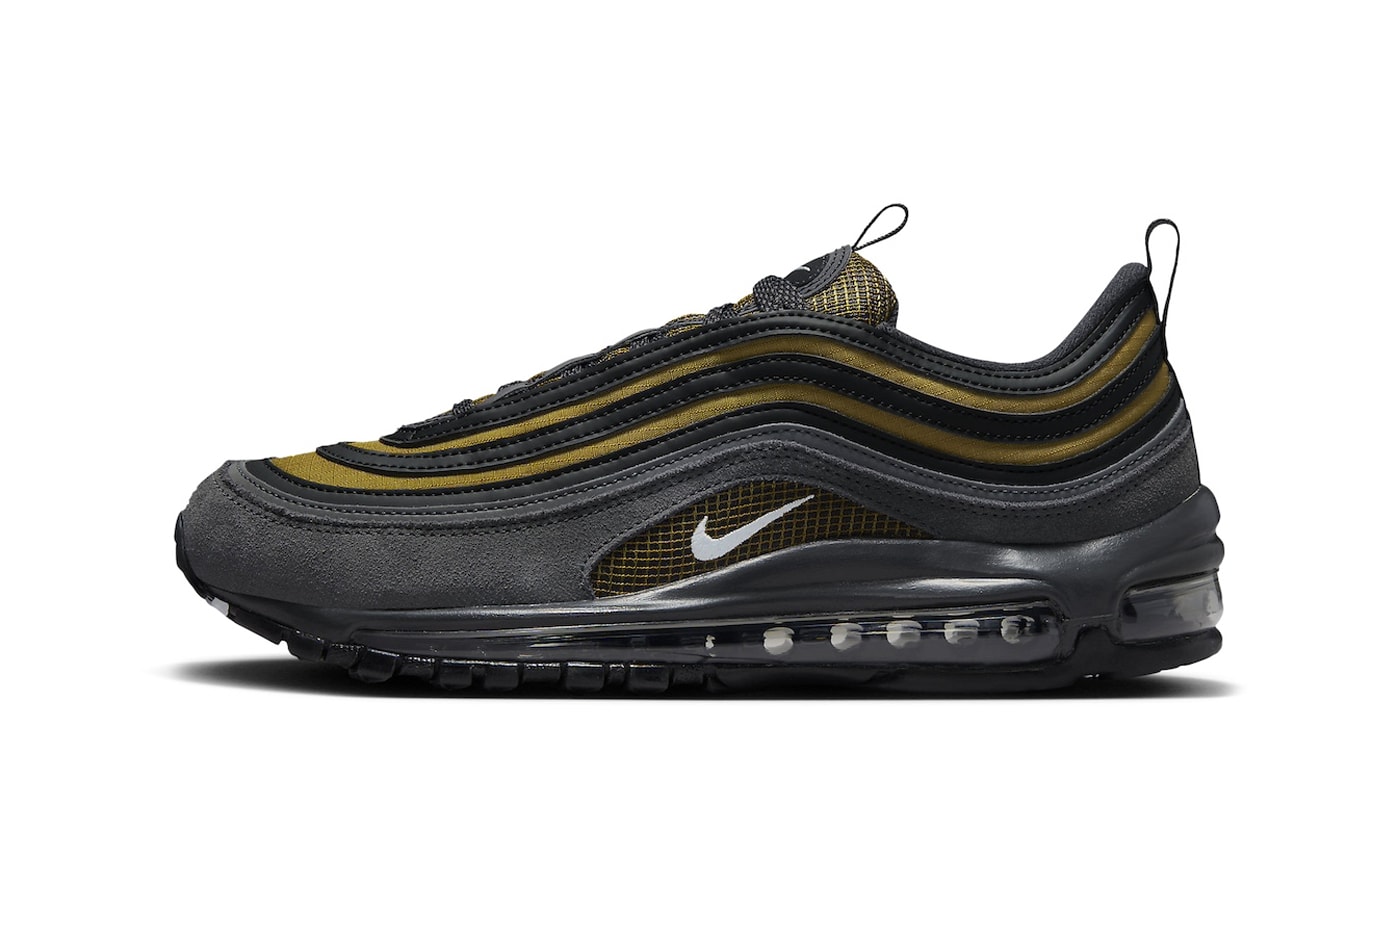 Nike Air Max 97 "Golden Beige" FB9619-200 Release Info Golden Beige/Anthracite-White december 2023 suede mesh leather sports shoes sneakers classic 